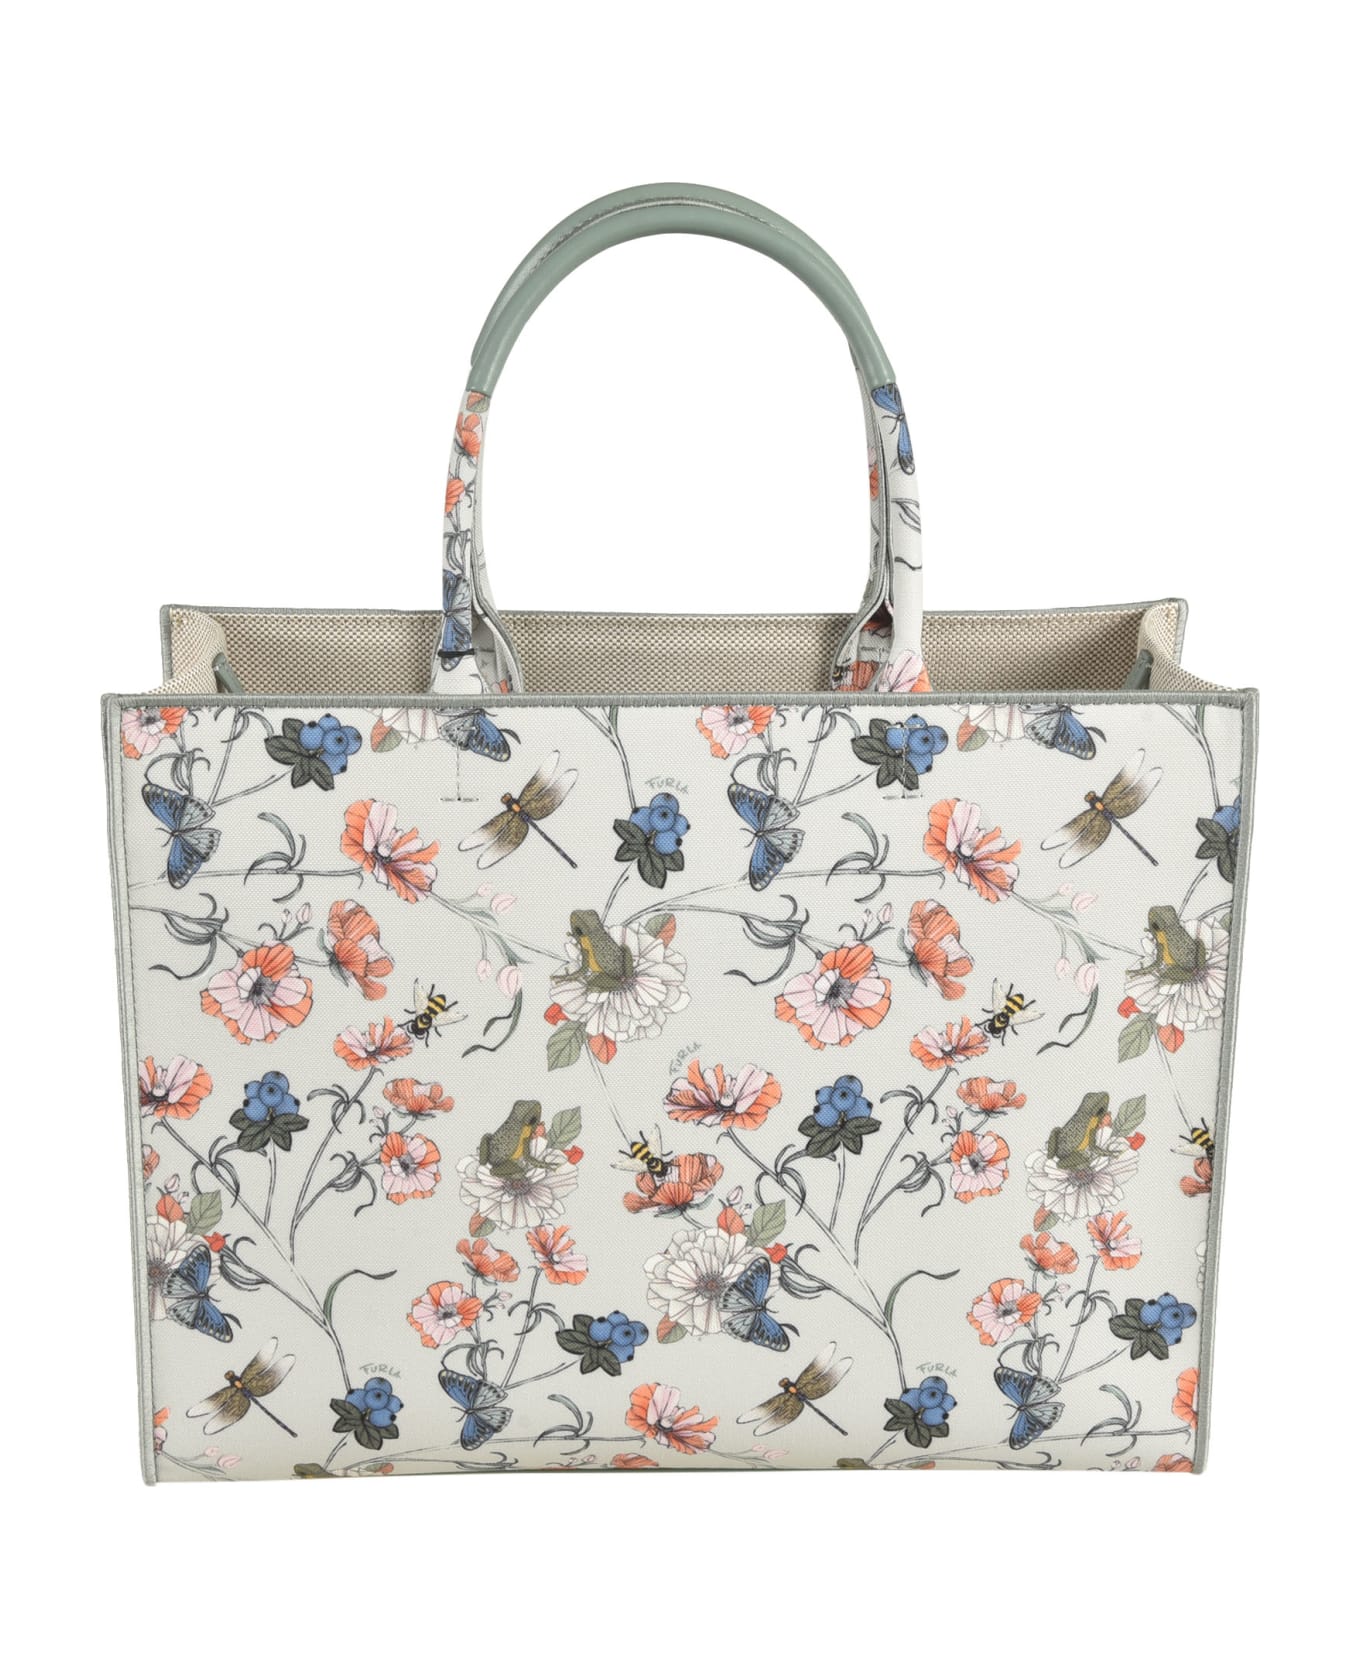 Furla Floral Tote - G3600 トートバッグ